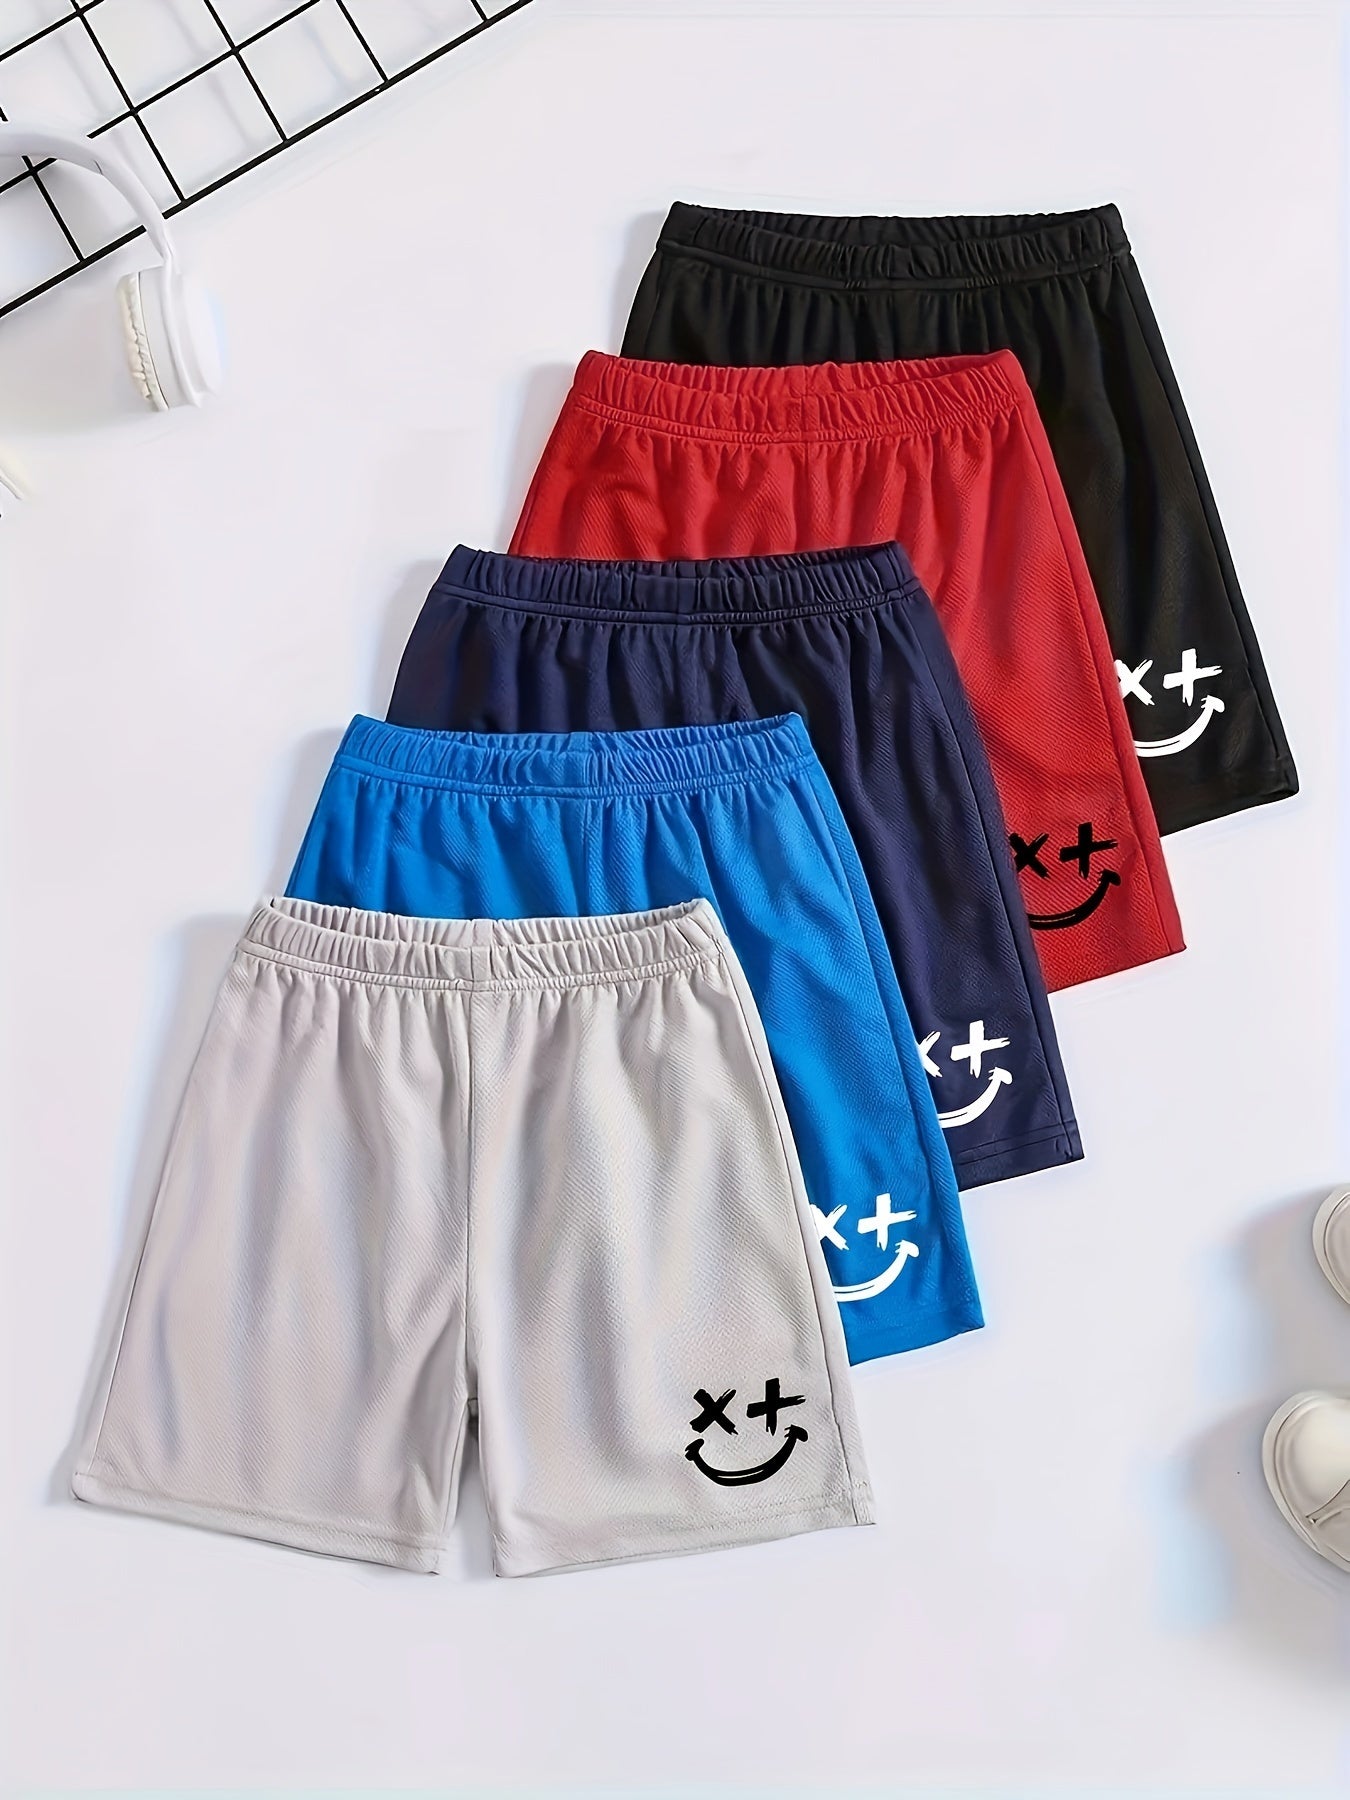 Multi-pack Boys Comfortable Creative Shorts, Casual Quick-drying Shorts For Summer Outdoor